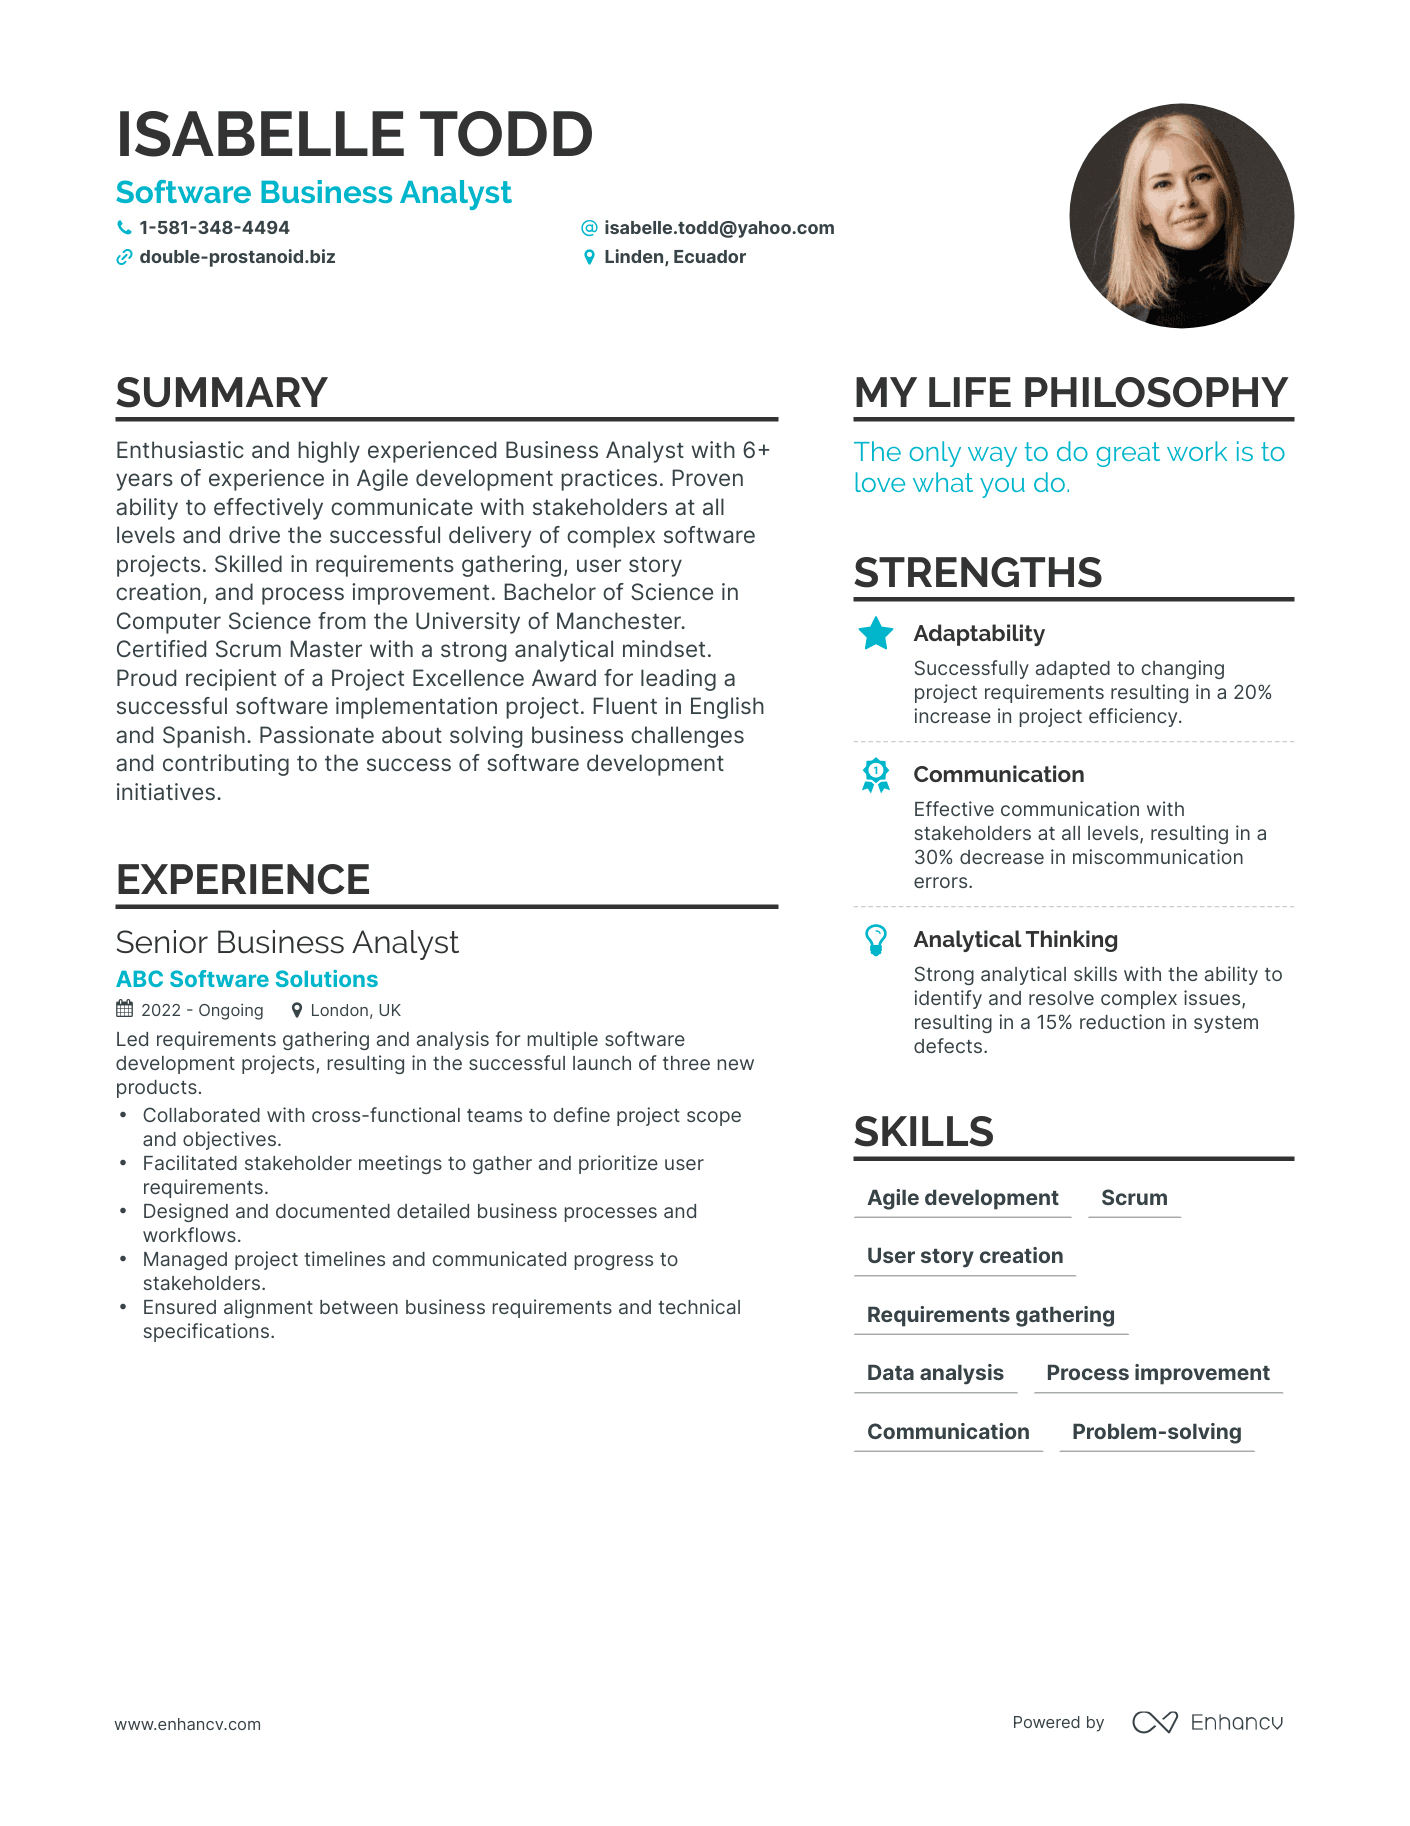 Software Business Analyst resume example